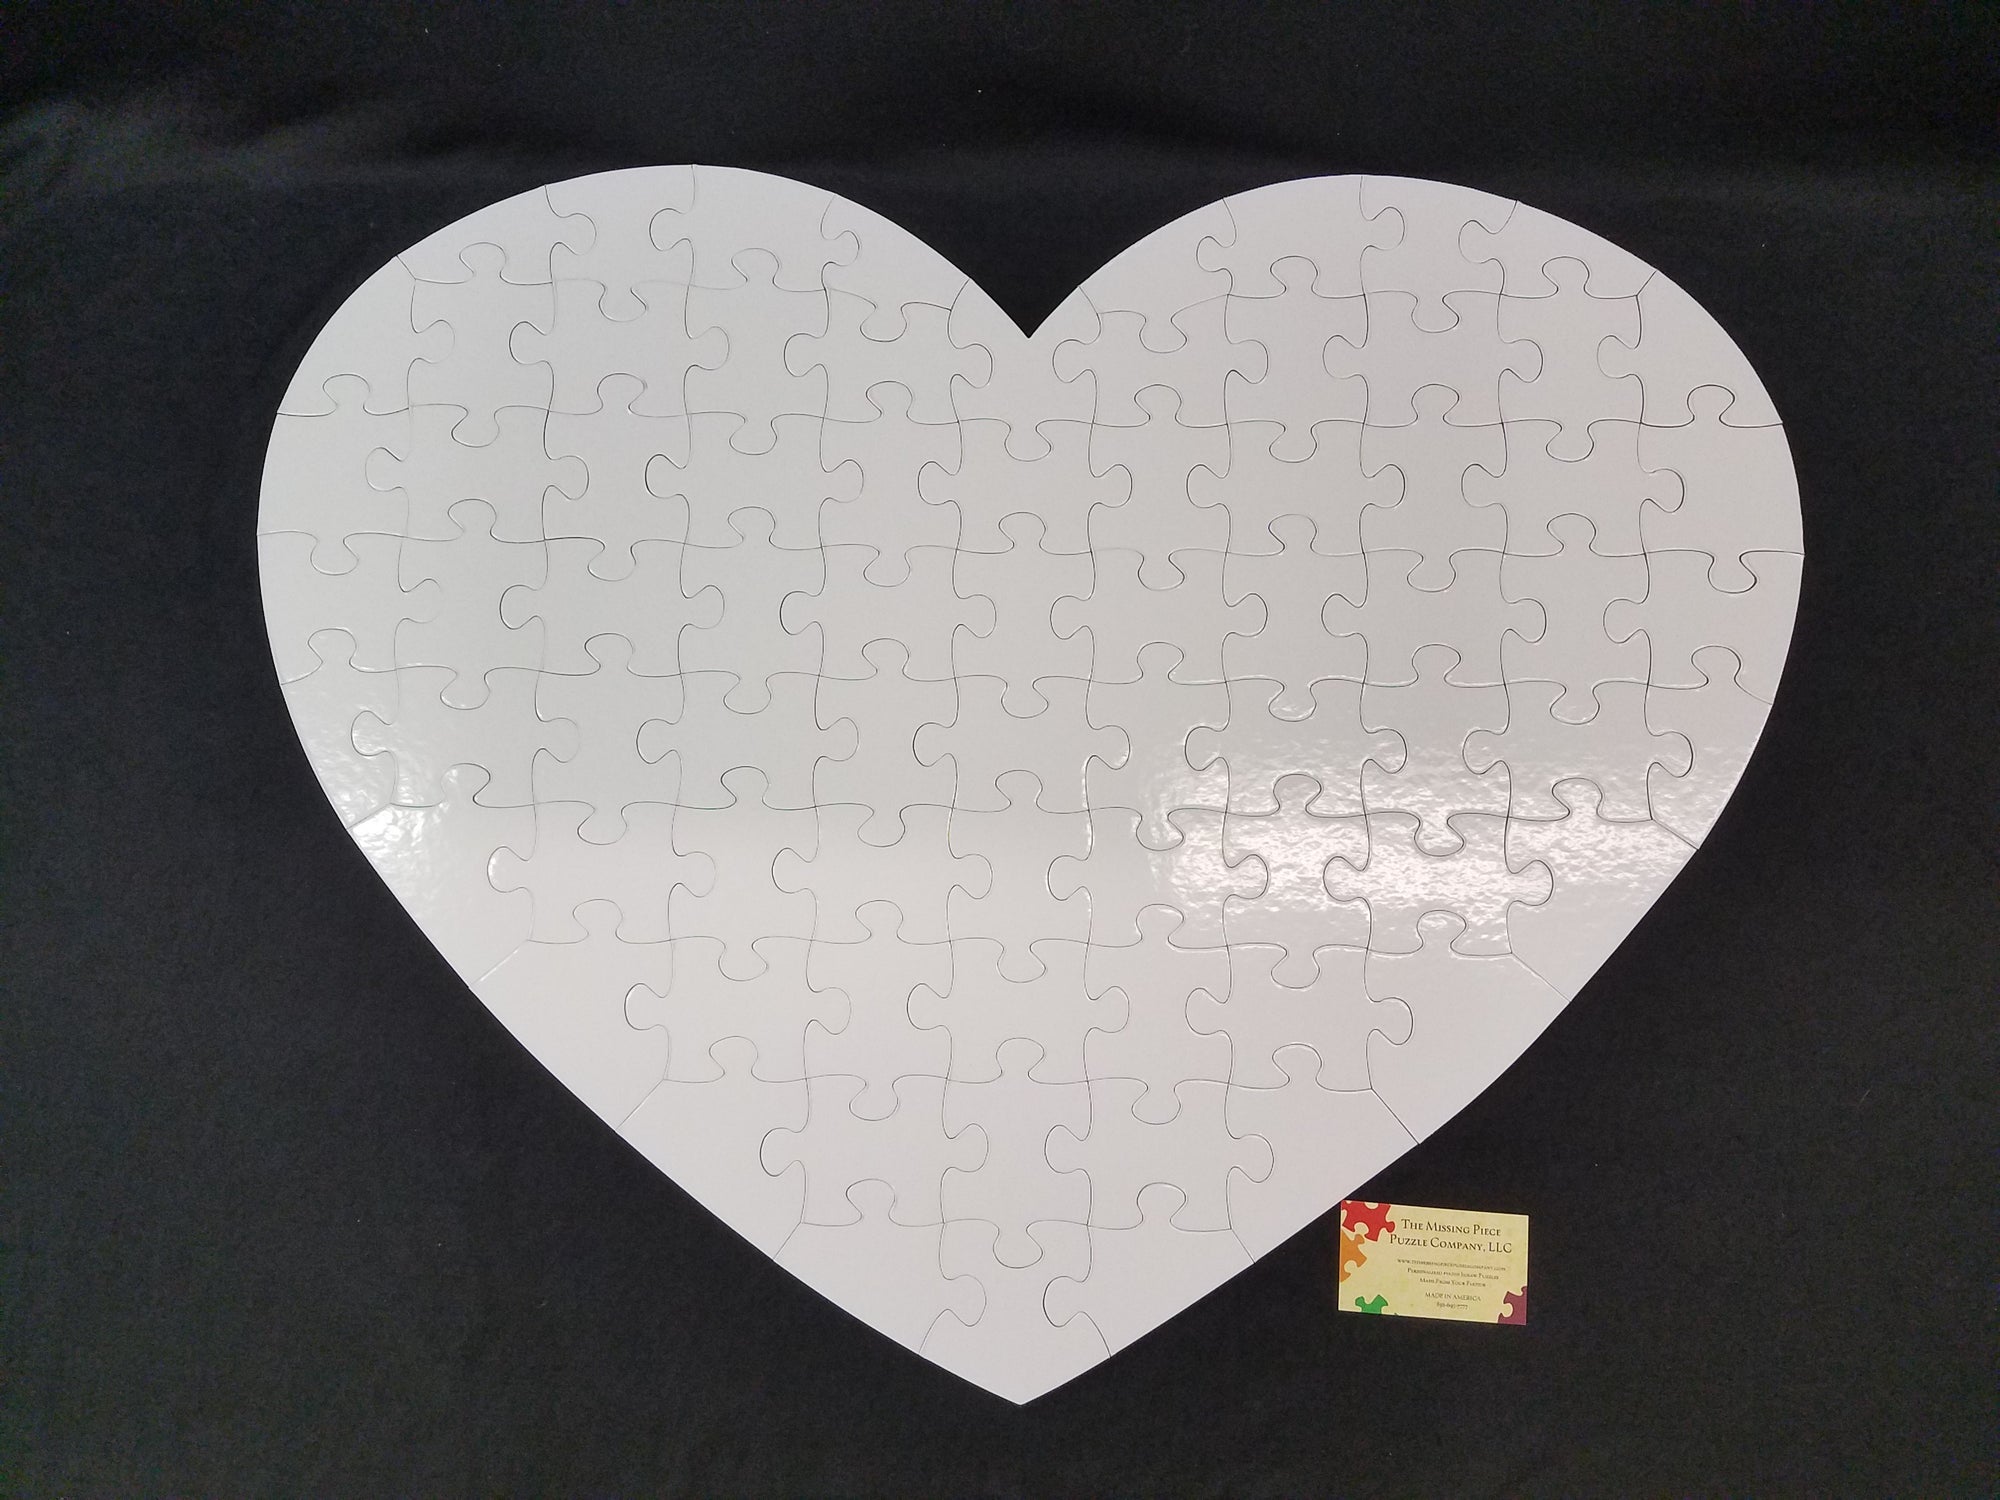 Giant Heart Shaped Guest Book Puzzle with extra large White Puzzle Pieces The Missing Piece Puzzle Company